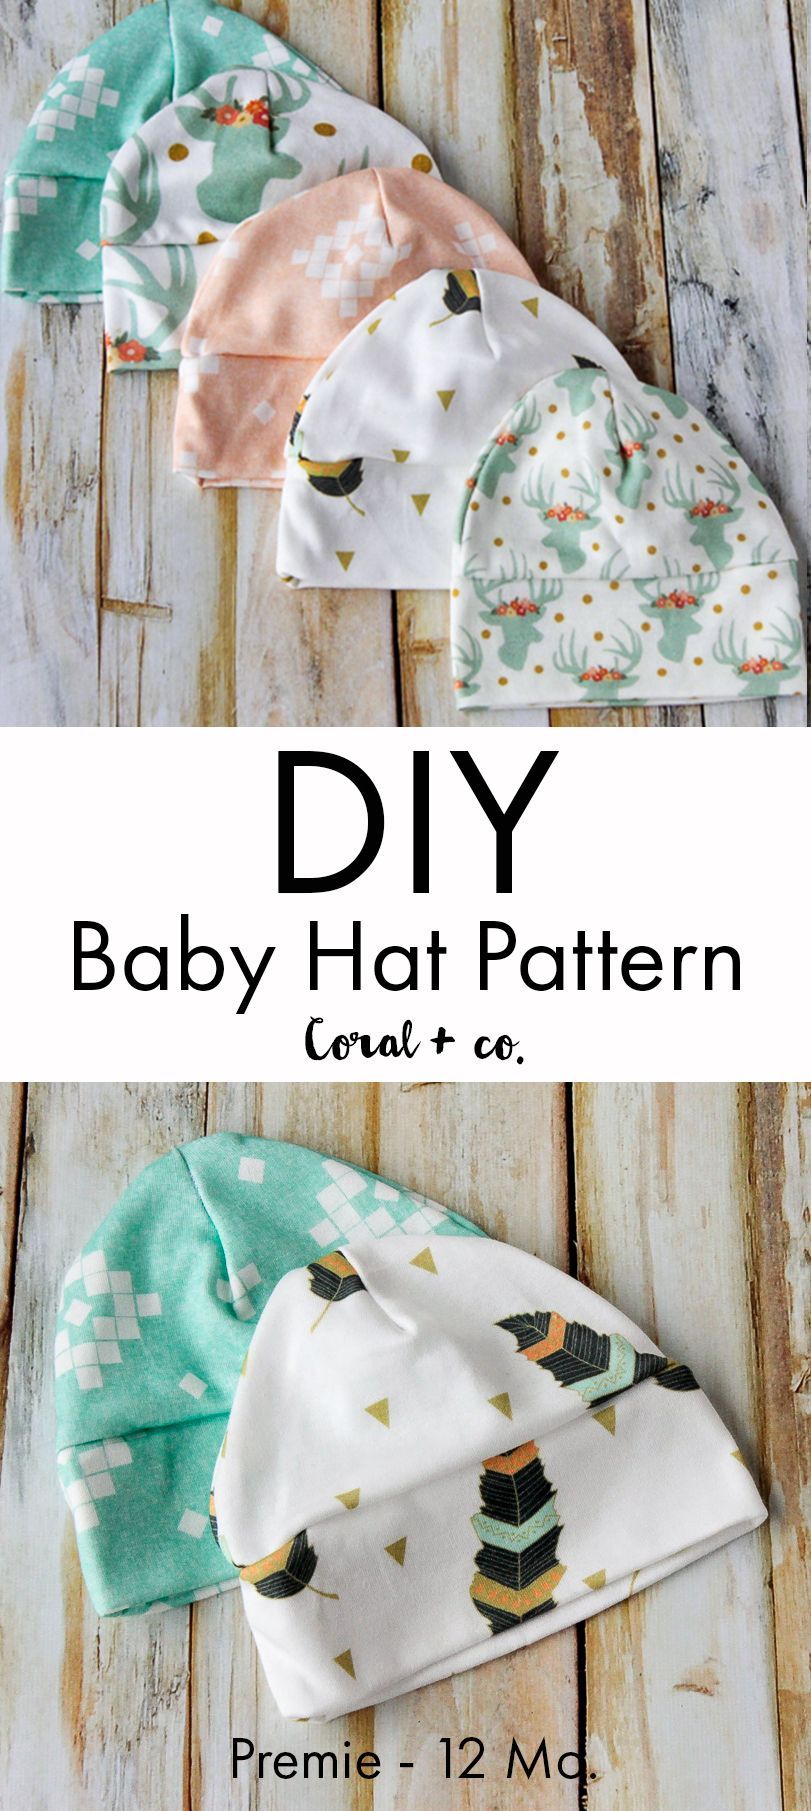 Adorable  Baby Hat Sewing Pattern!  It comes in sizes  preemie through 12 months